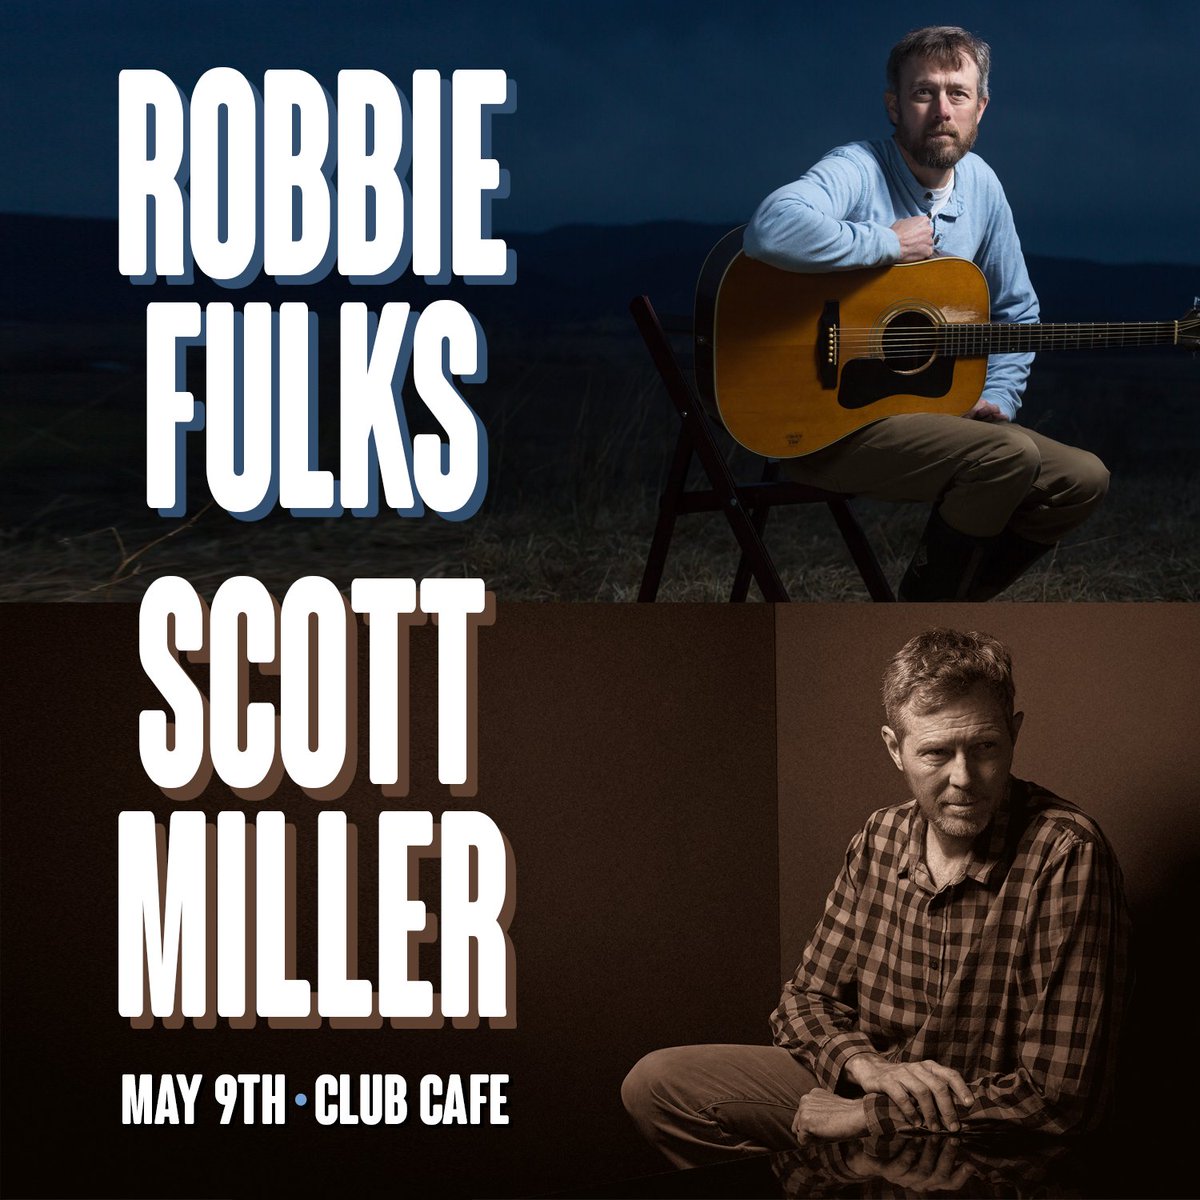 🎶 TONIGHT 🎶

05/09 | @RobbieFulks + @commonwealther | @ClubCafeLive

🎟️ Buy Tixs: tinyurl.com/yjk3ppp5  
Doors: 7:00pm  

Tickets are available for purchase online or at the door. 
#tonight #pghconcerts #clubcafe #clubcafelive #livemusic #music